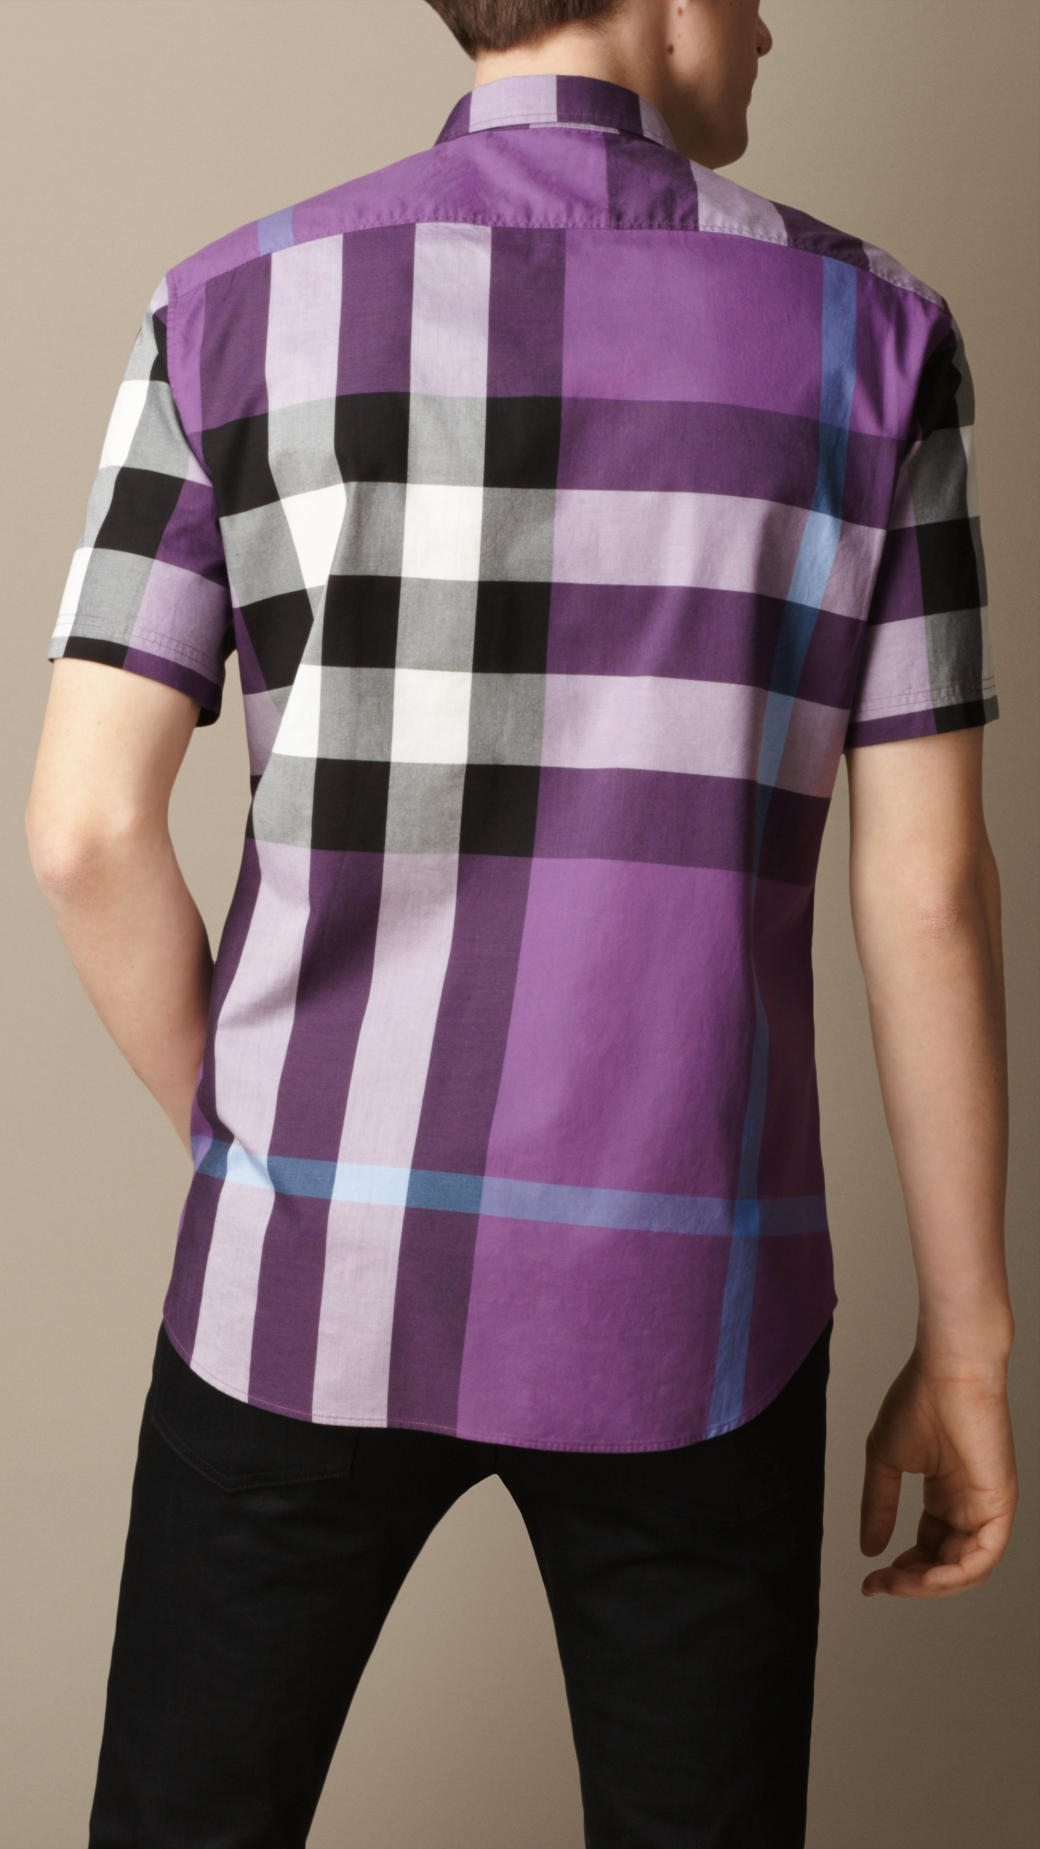 Burberry Giant Exploded Check Cotton Shirt in Purple for Men - Lyst